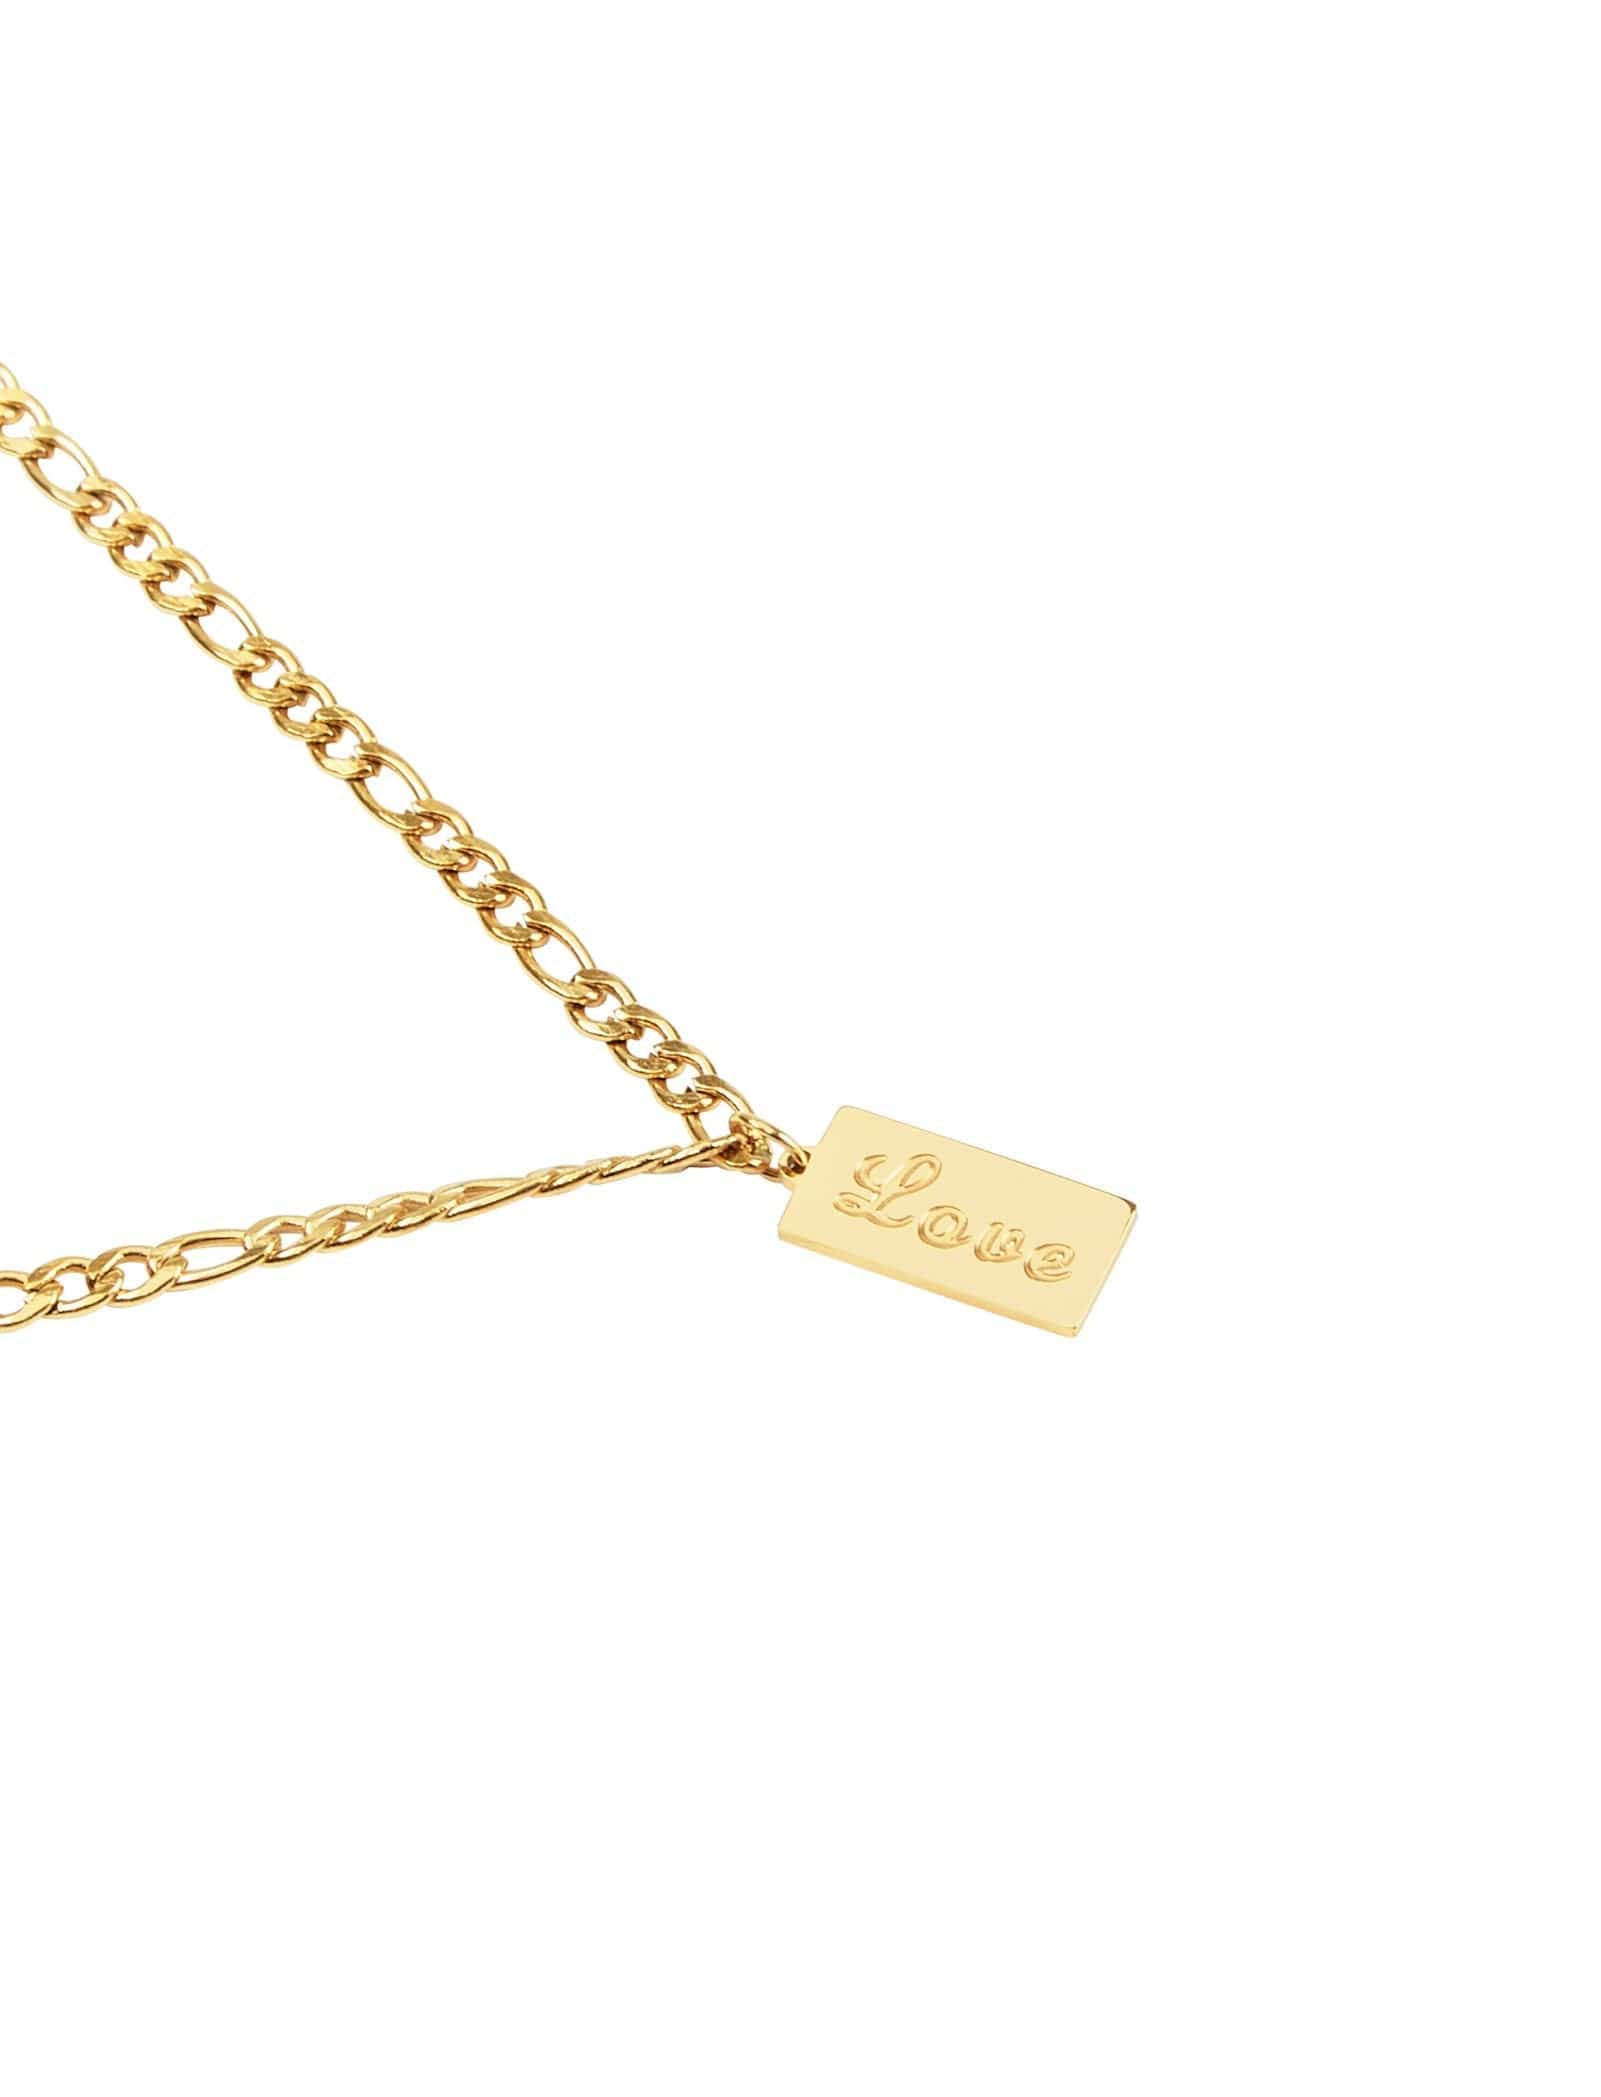 Dear Addison Yellow Gold Love Tag Necklace